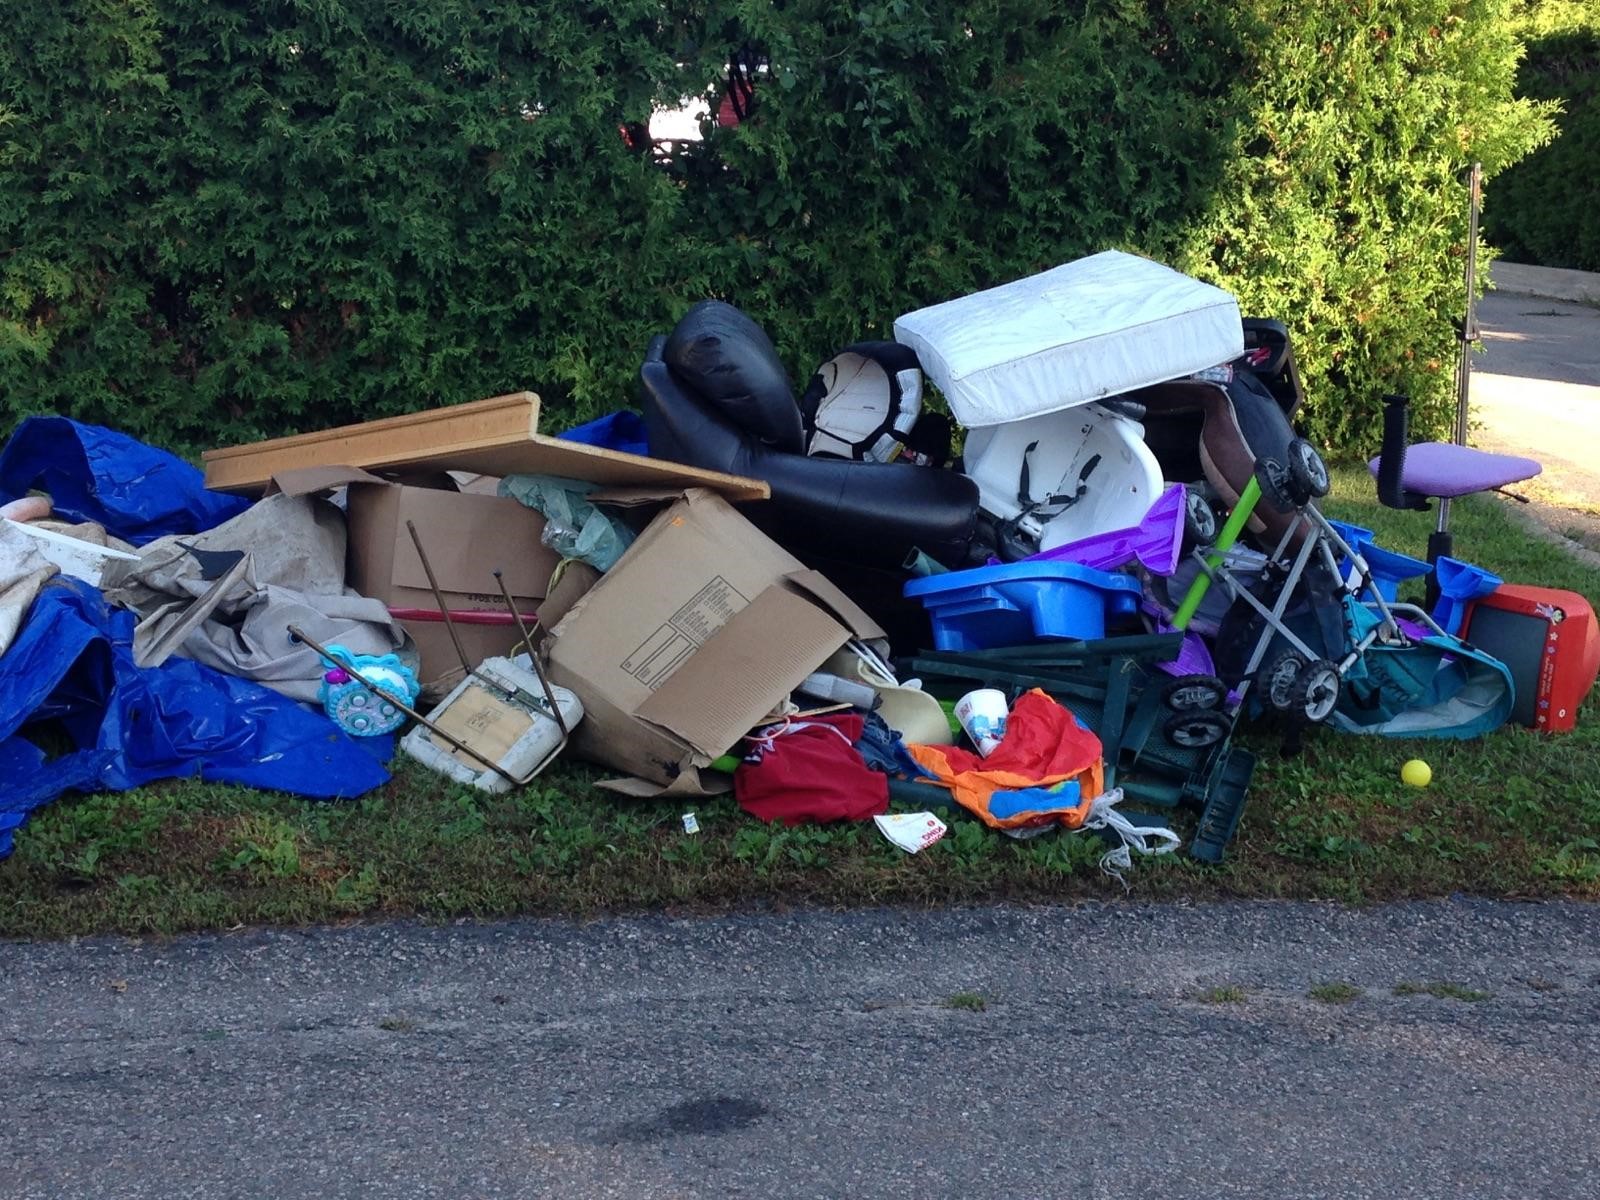 A pile of large items loosely thrown together at the end of the driveway displaying how to incorrectly place items for collection.